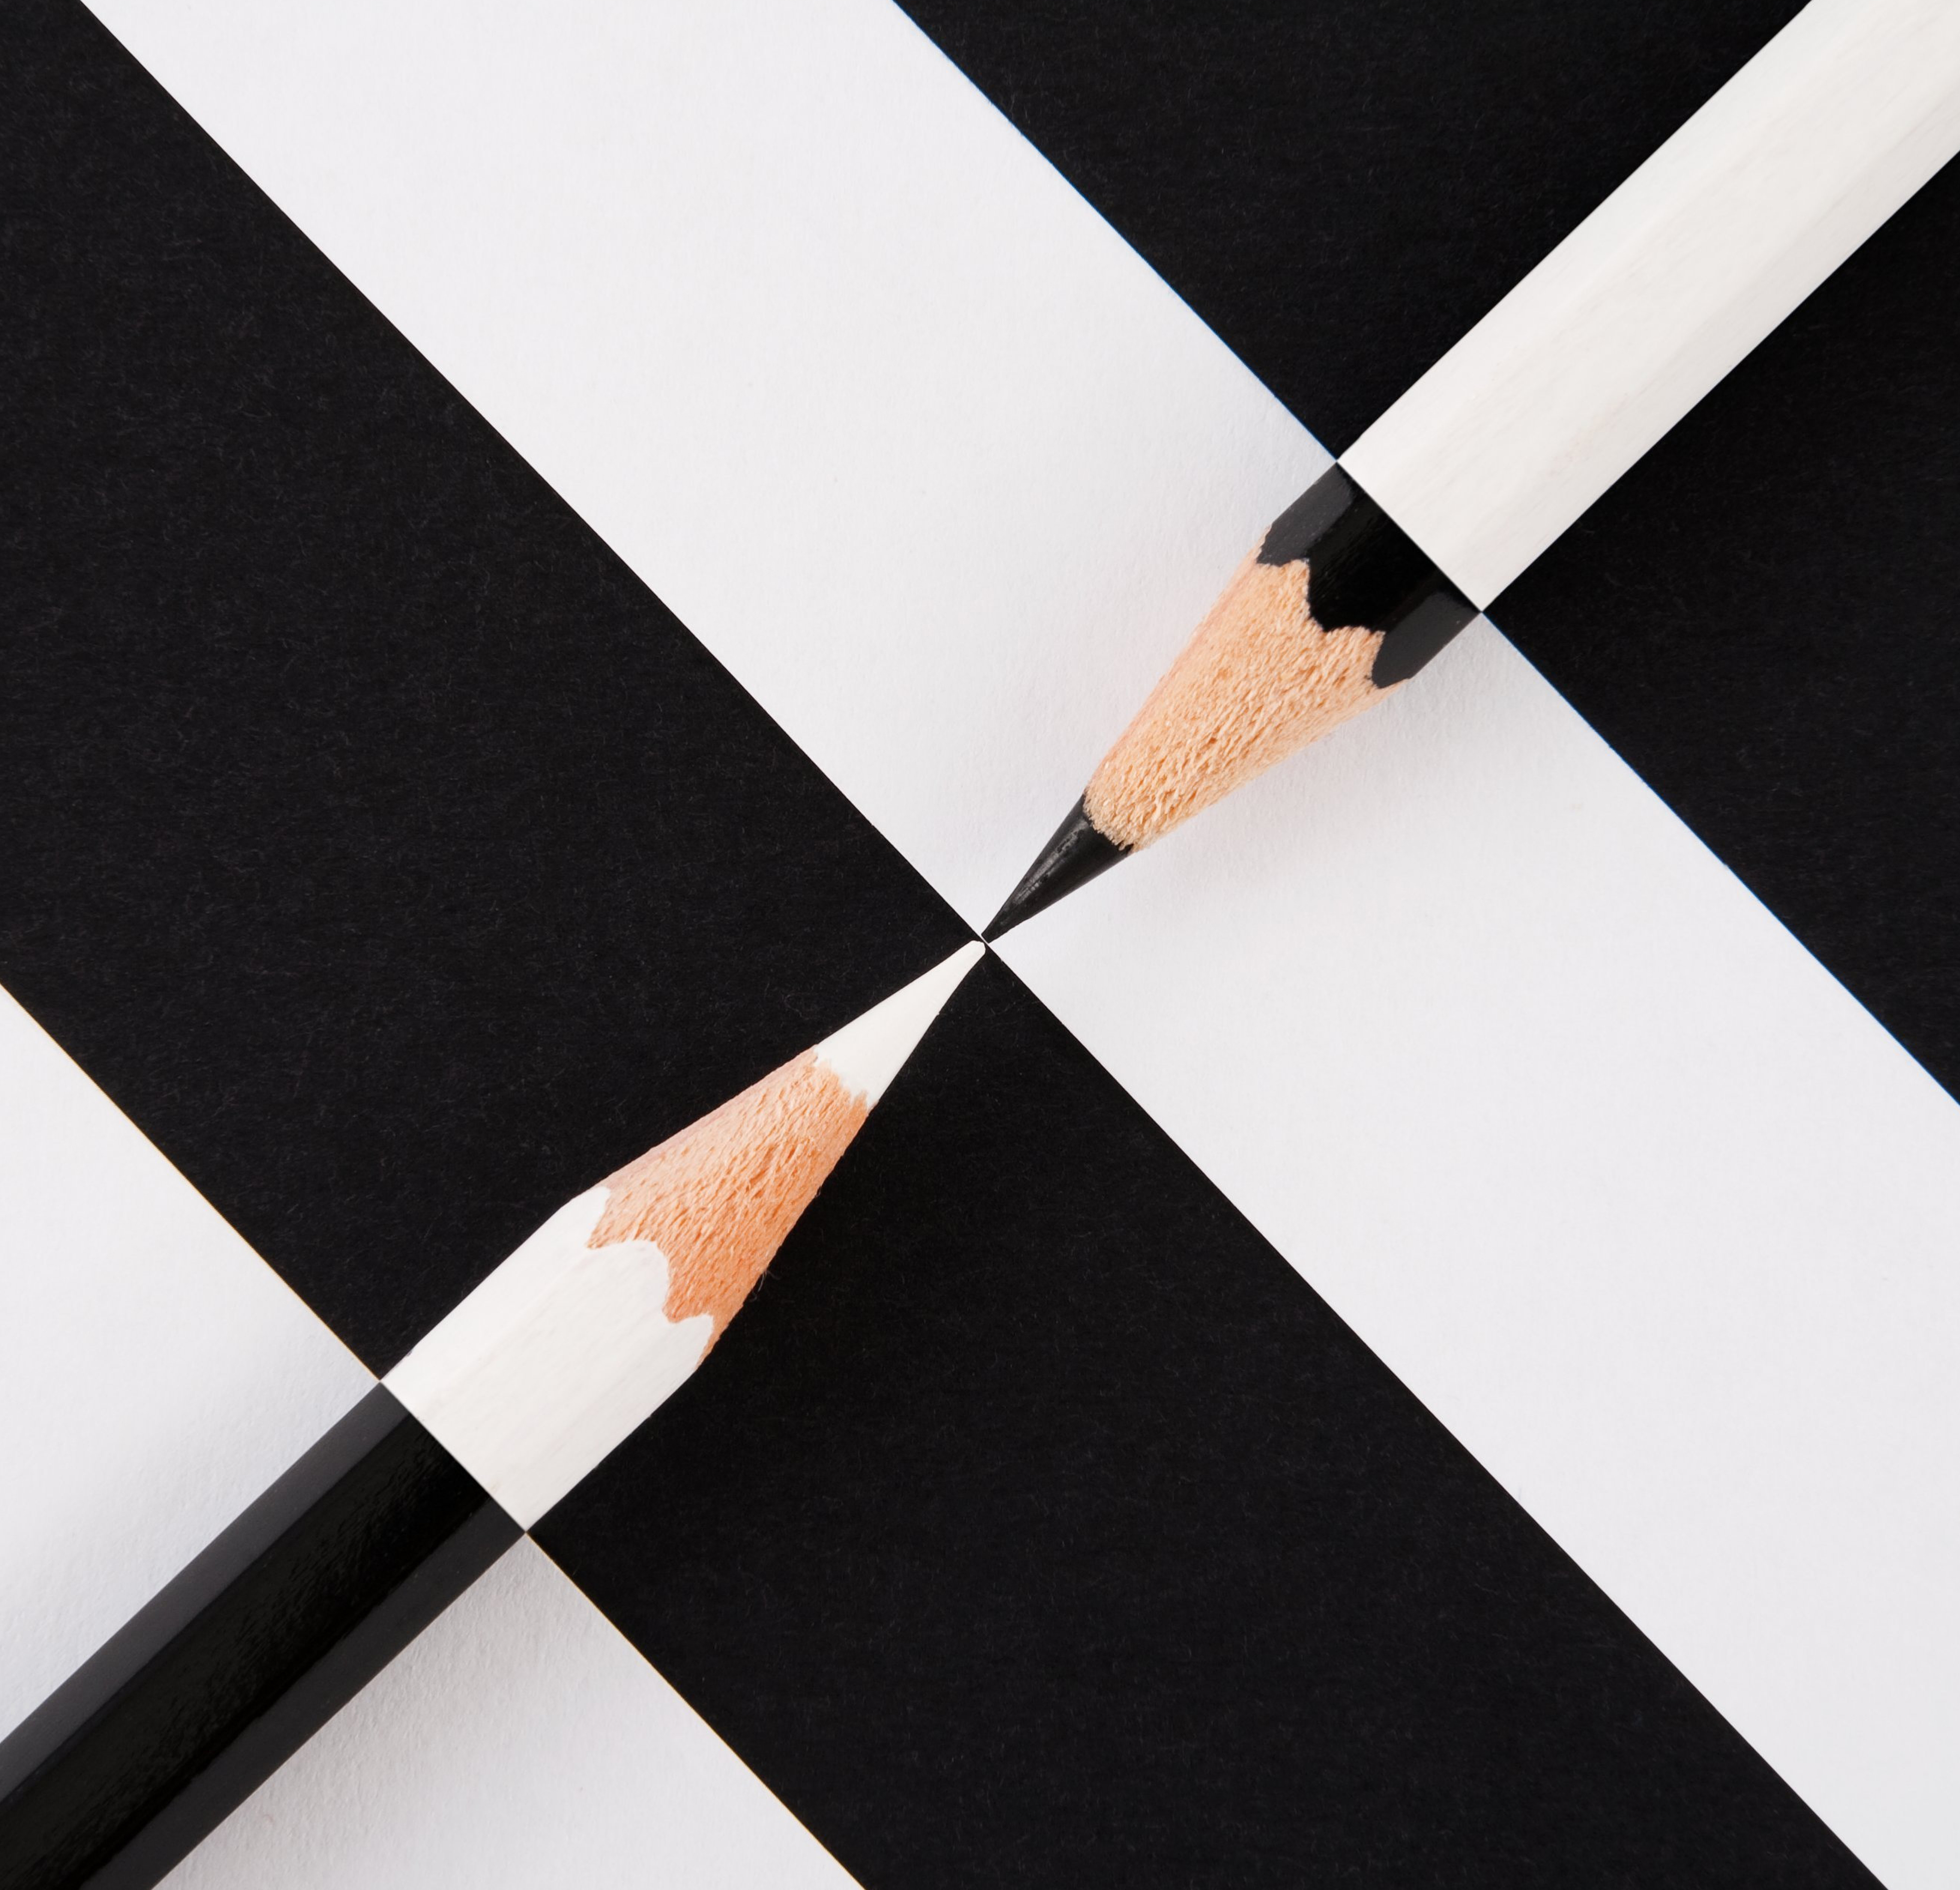 A black pencil and a white pencil pointing at each other over a black and white background